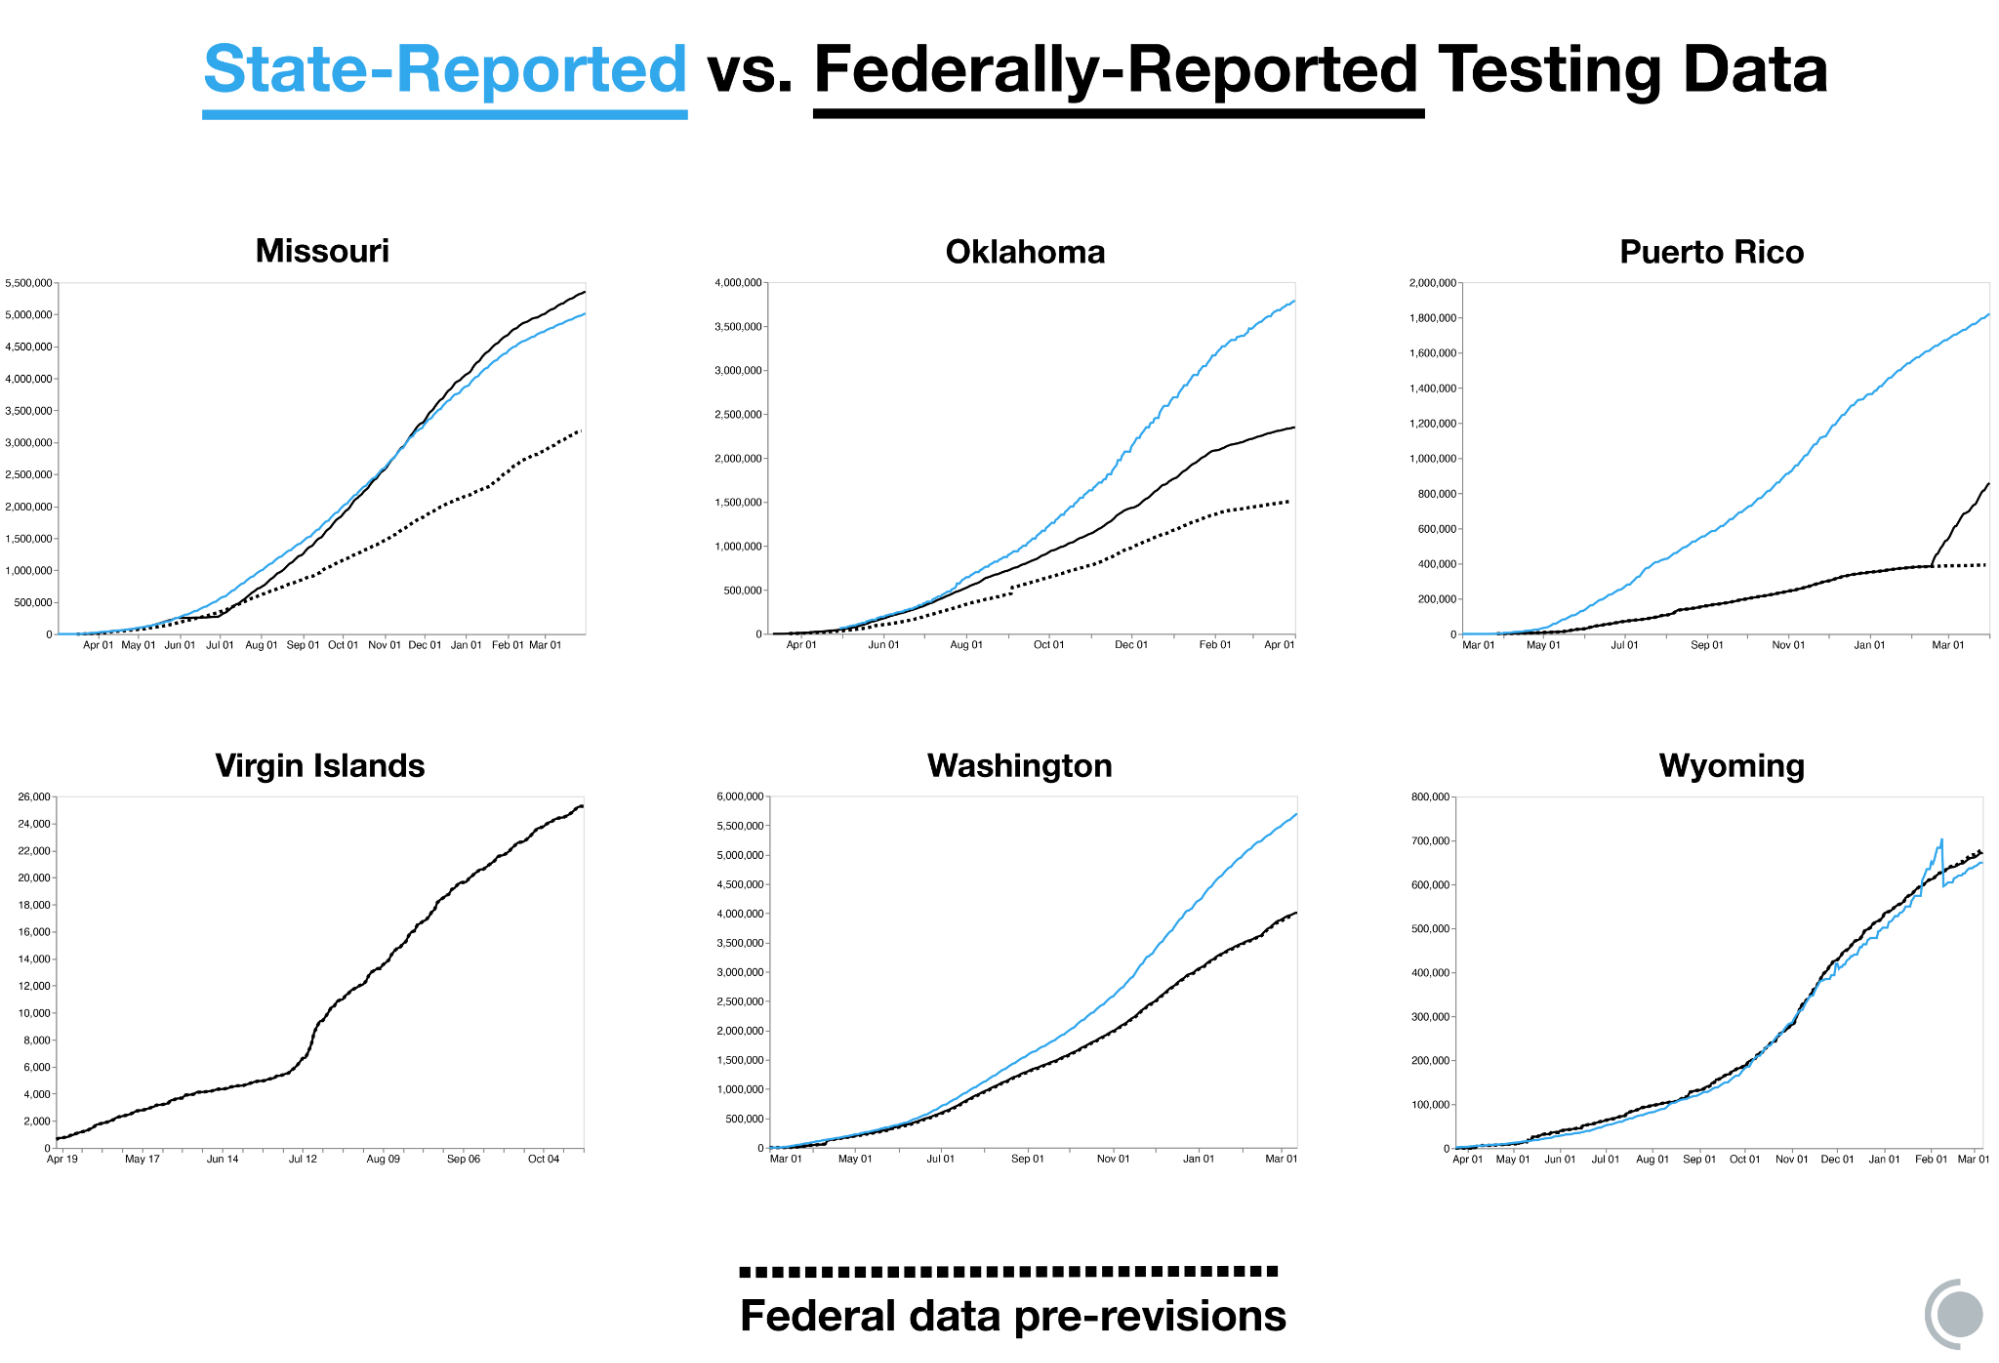 Six graphs depict historical federal testing data curves before and after switches in data sourcing for Missouri, Oklahoma, Puerto Rico, the Virgin Islands, Washington, and Wyoming. They also show jurisdictional data for every jurisdiction except the Virgin Islands. Changes in data sourcing did not seem to make much of an impact in the Virgin Islands, Washington, and Wyoming. All three jurisdictions' federal data closely matched jurisdiction-provided data before and continue to match after sourcing changes. Missouri's data was shifted upward and now is very close to state data. Oklahoma's data became more complete after switching data sources, but still is lower than the state counts.